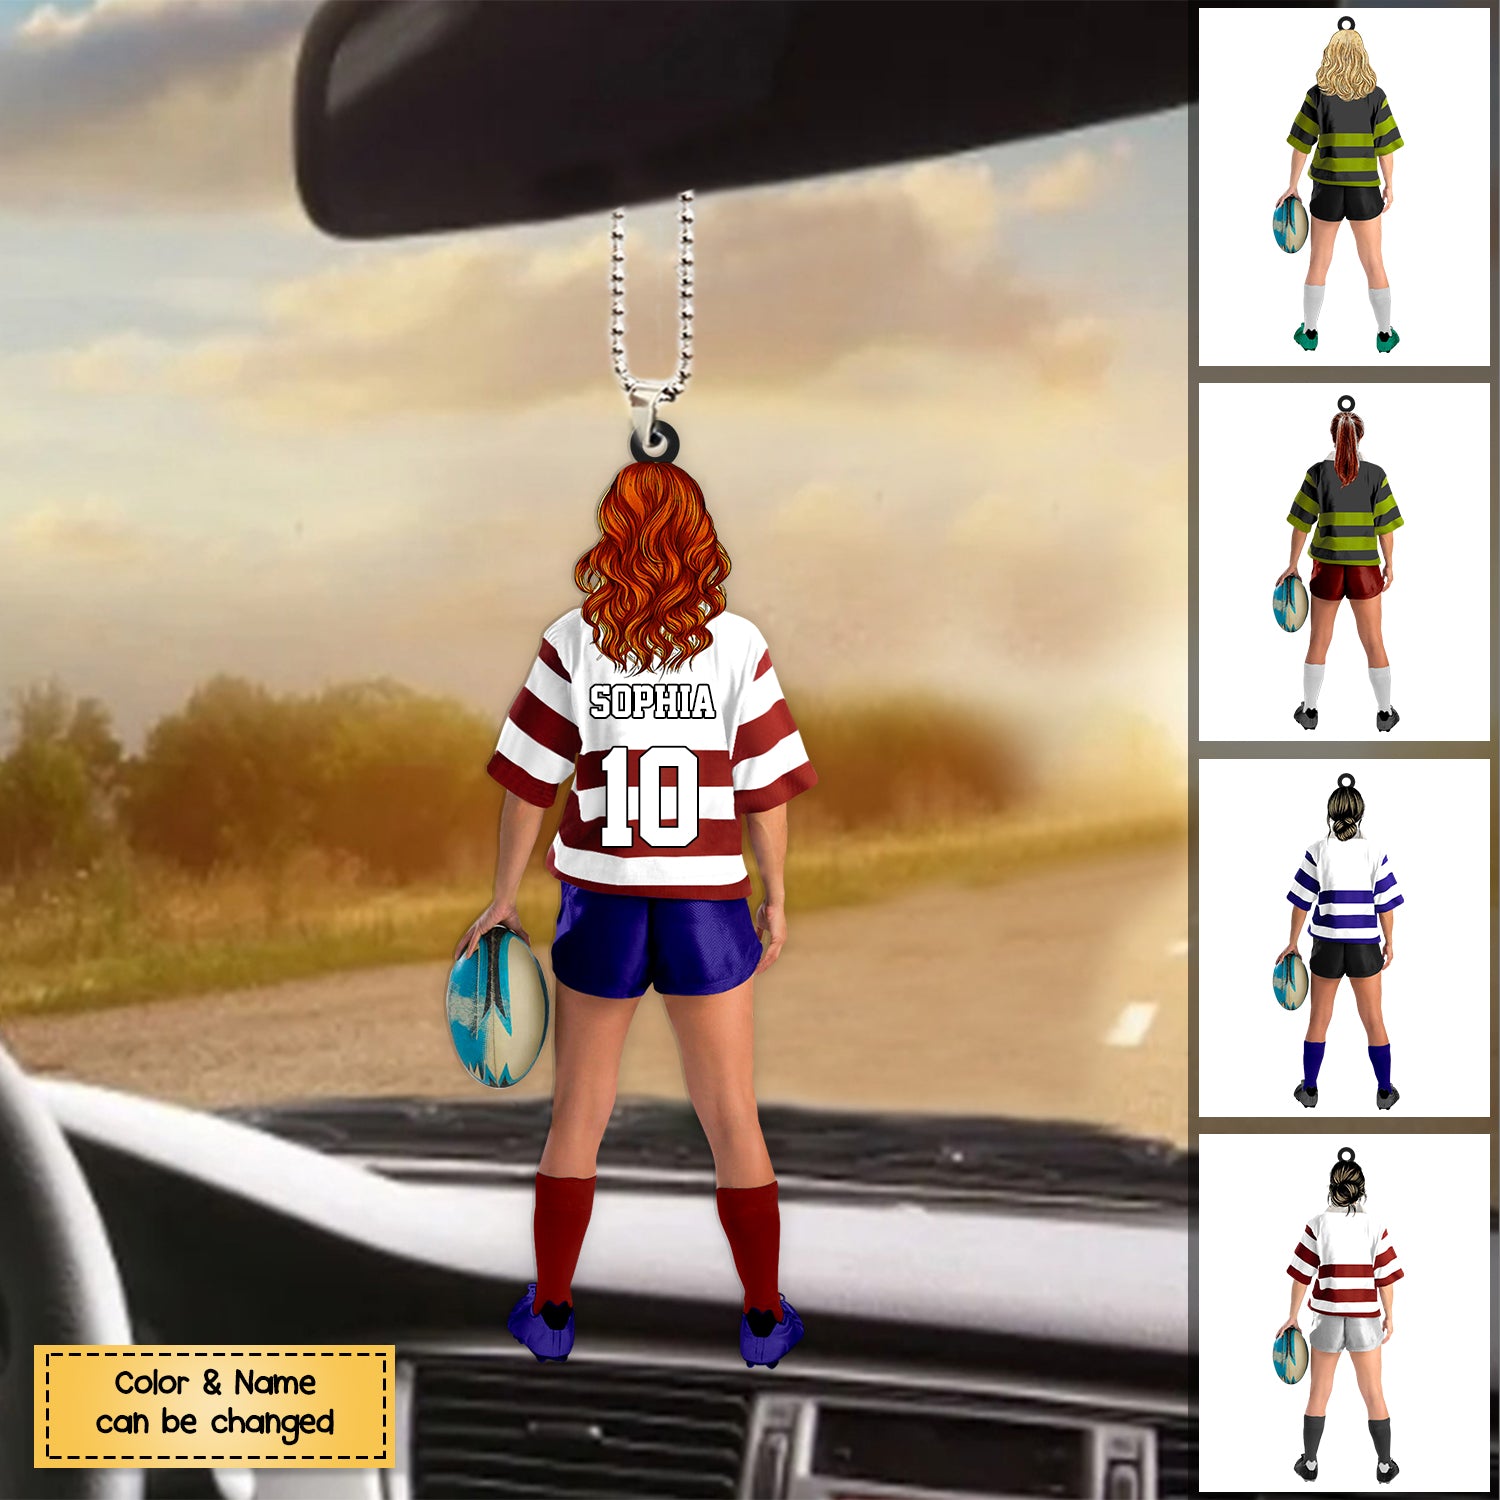 Personalized Rugby Female/Girl/Woman Player Acrylic Christmas Ornament - Gift For Rugby Players